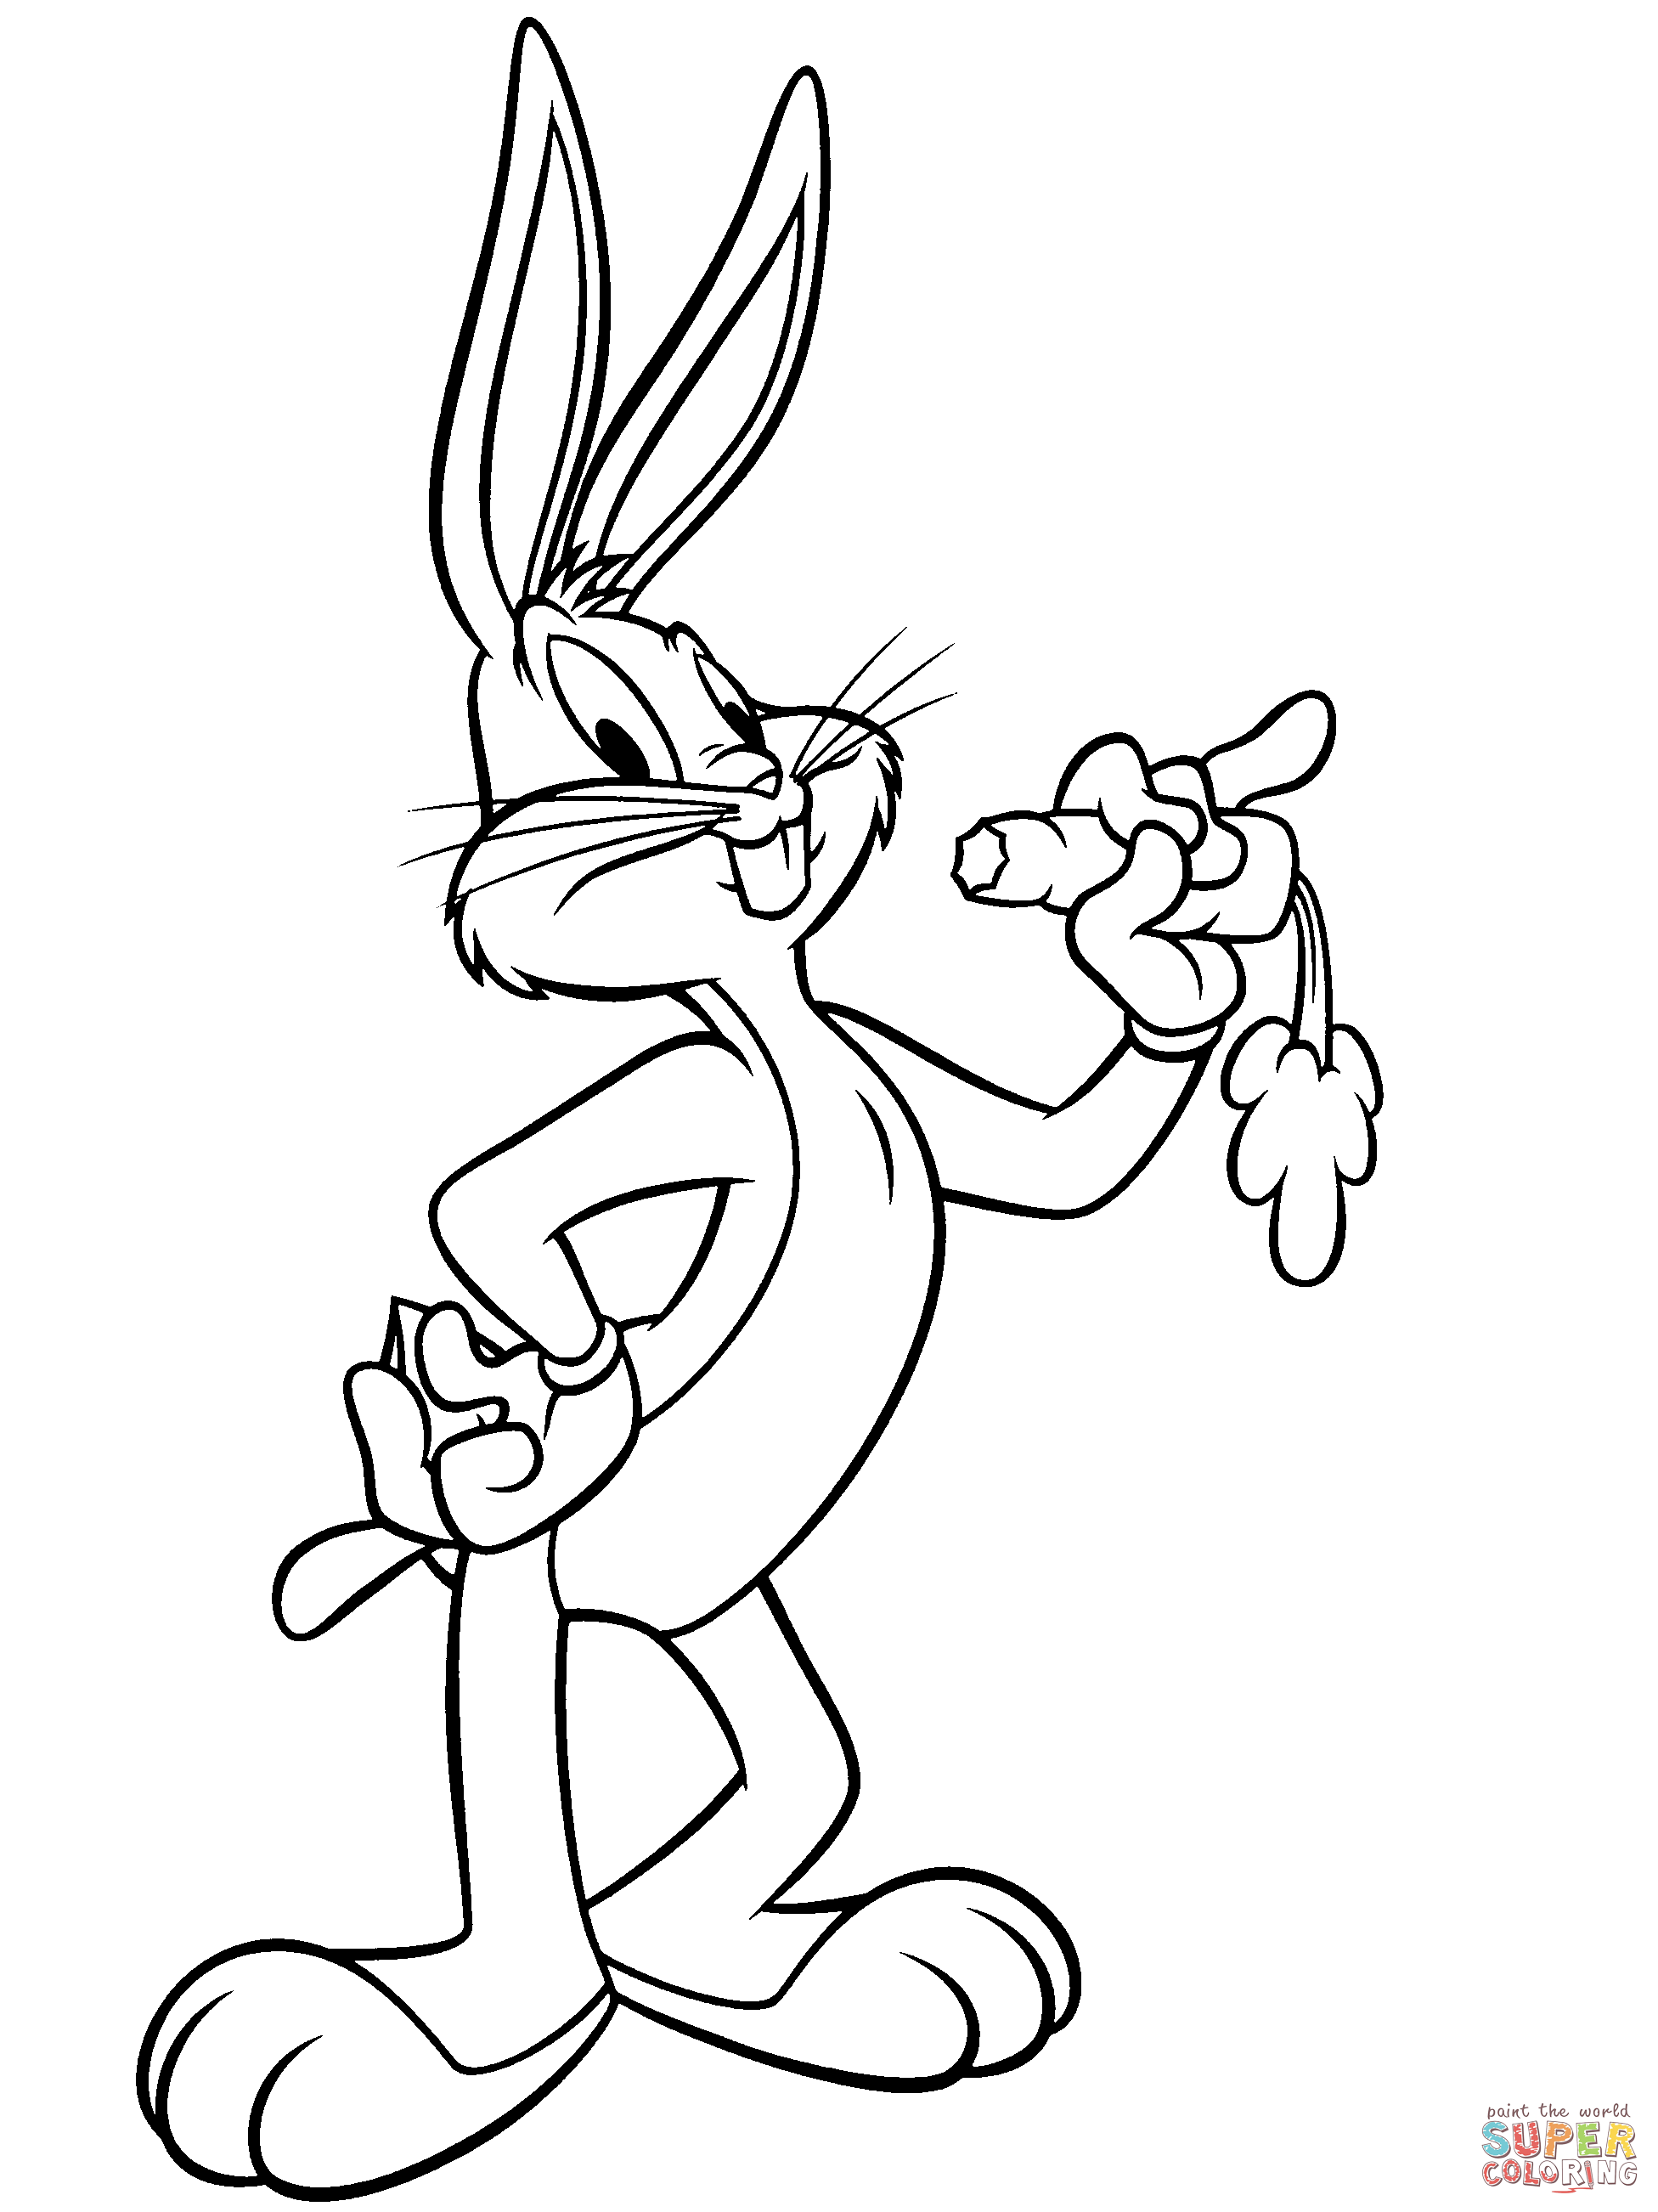 Bugs Bunny Coloring Page Free Printable Coloring Pages - Free Printable Bugs Bunny Coloring Pages